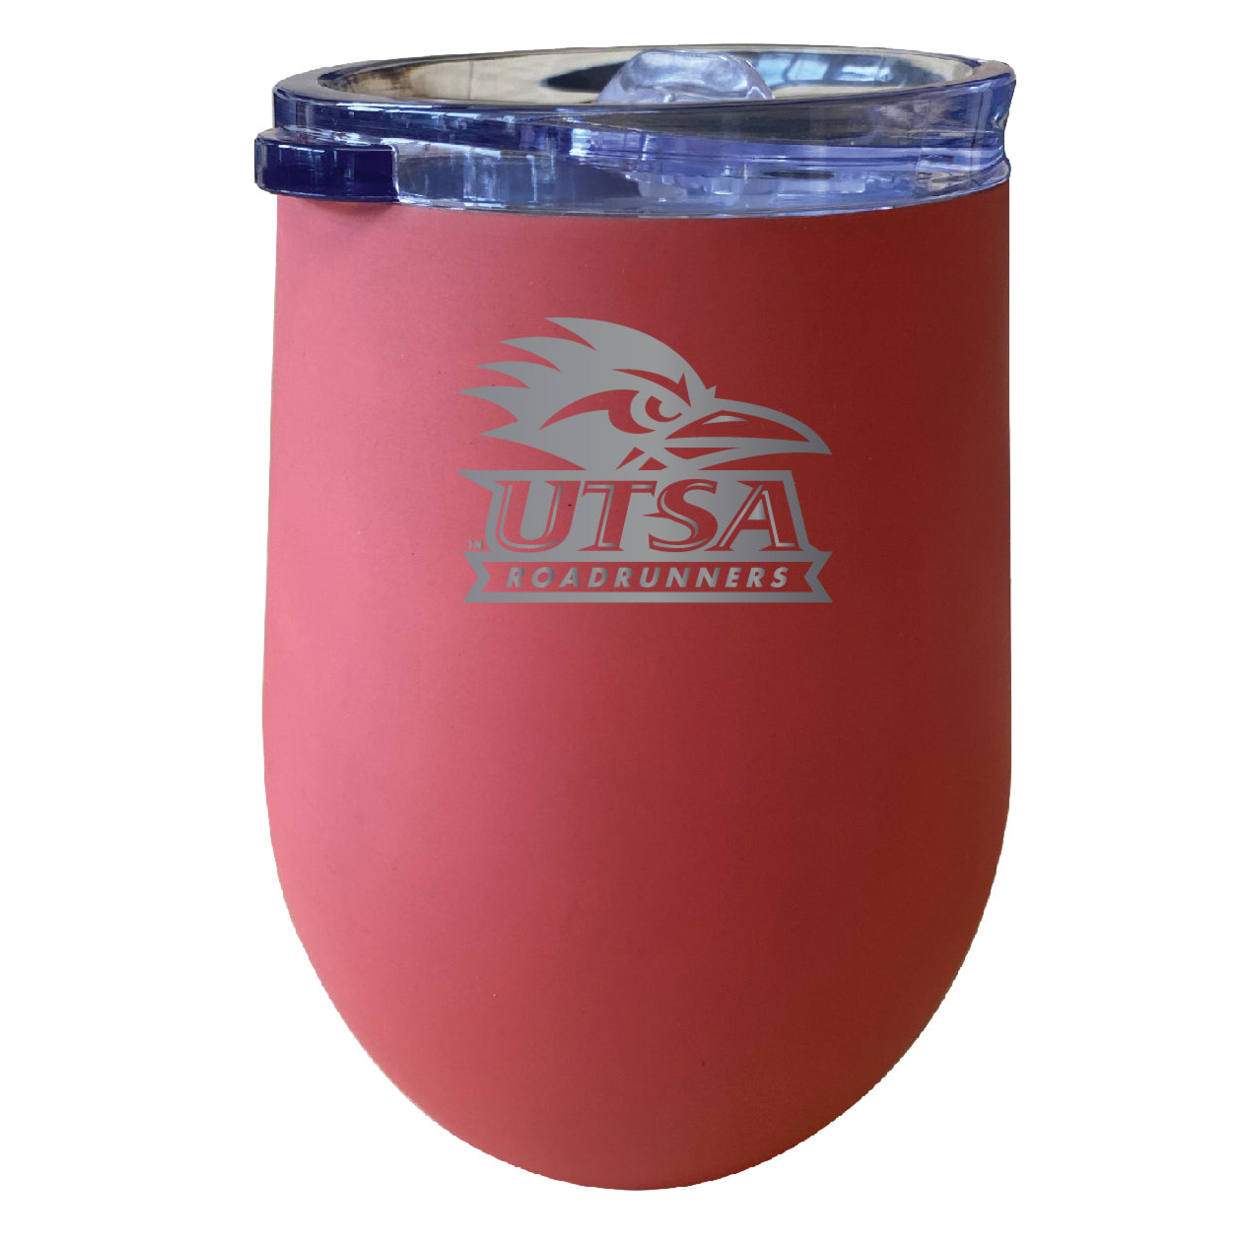 UTSA Road Runners 12 Oz Etched Insulated Wine Stainless Steel Tumbler - Choose Your Color - Navy